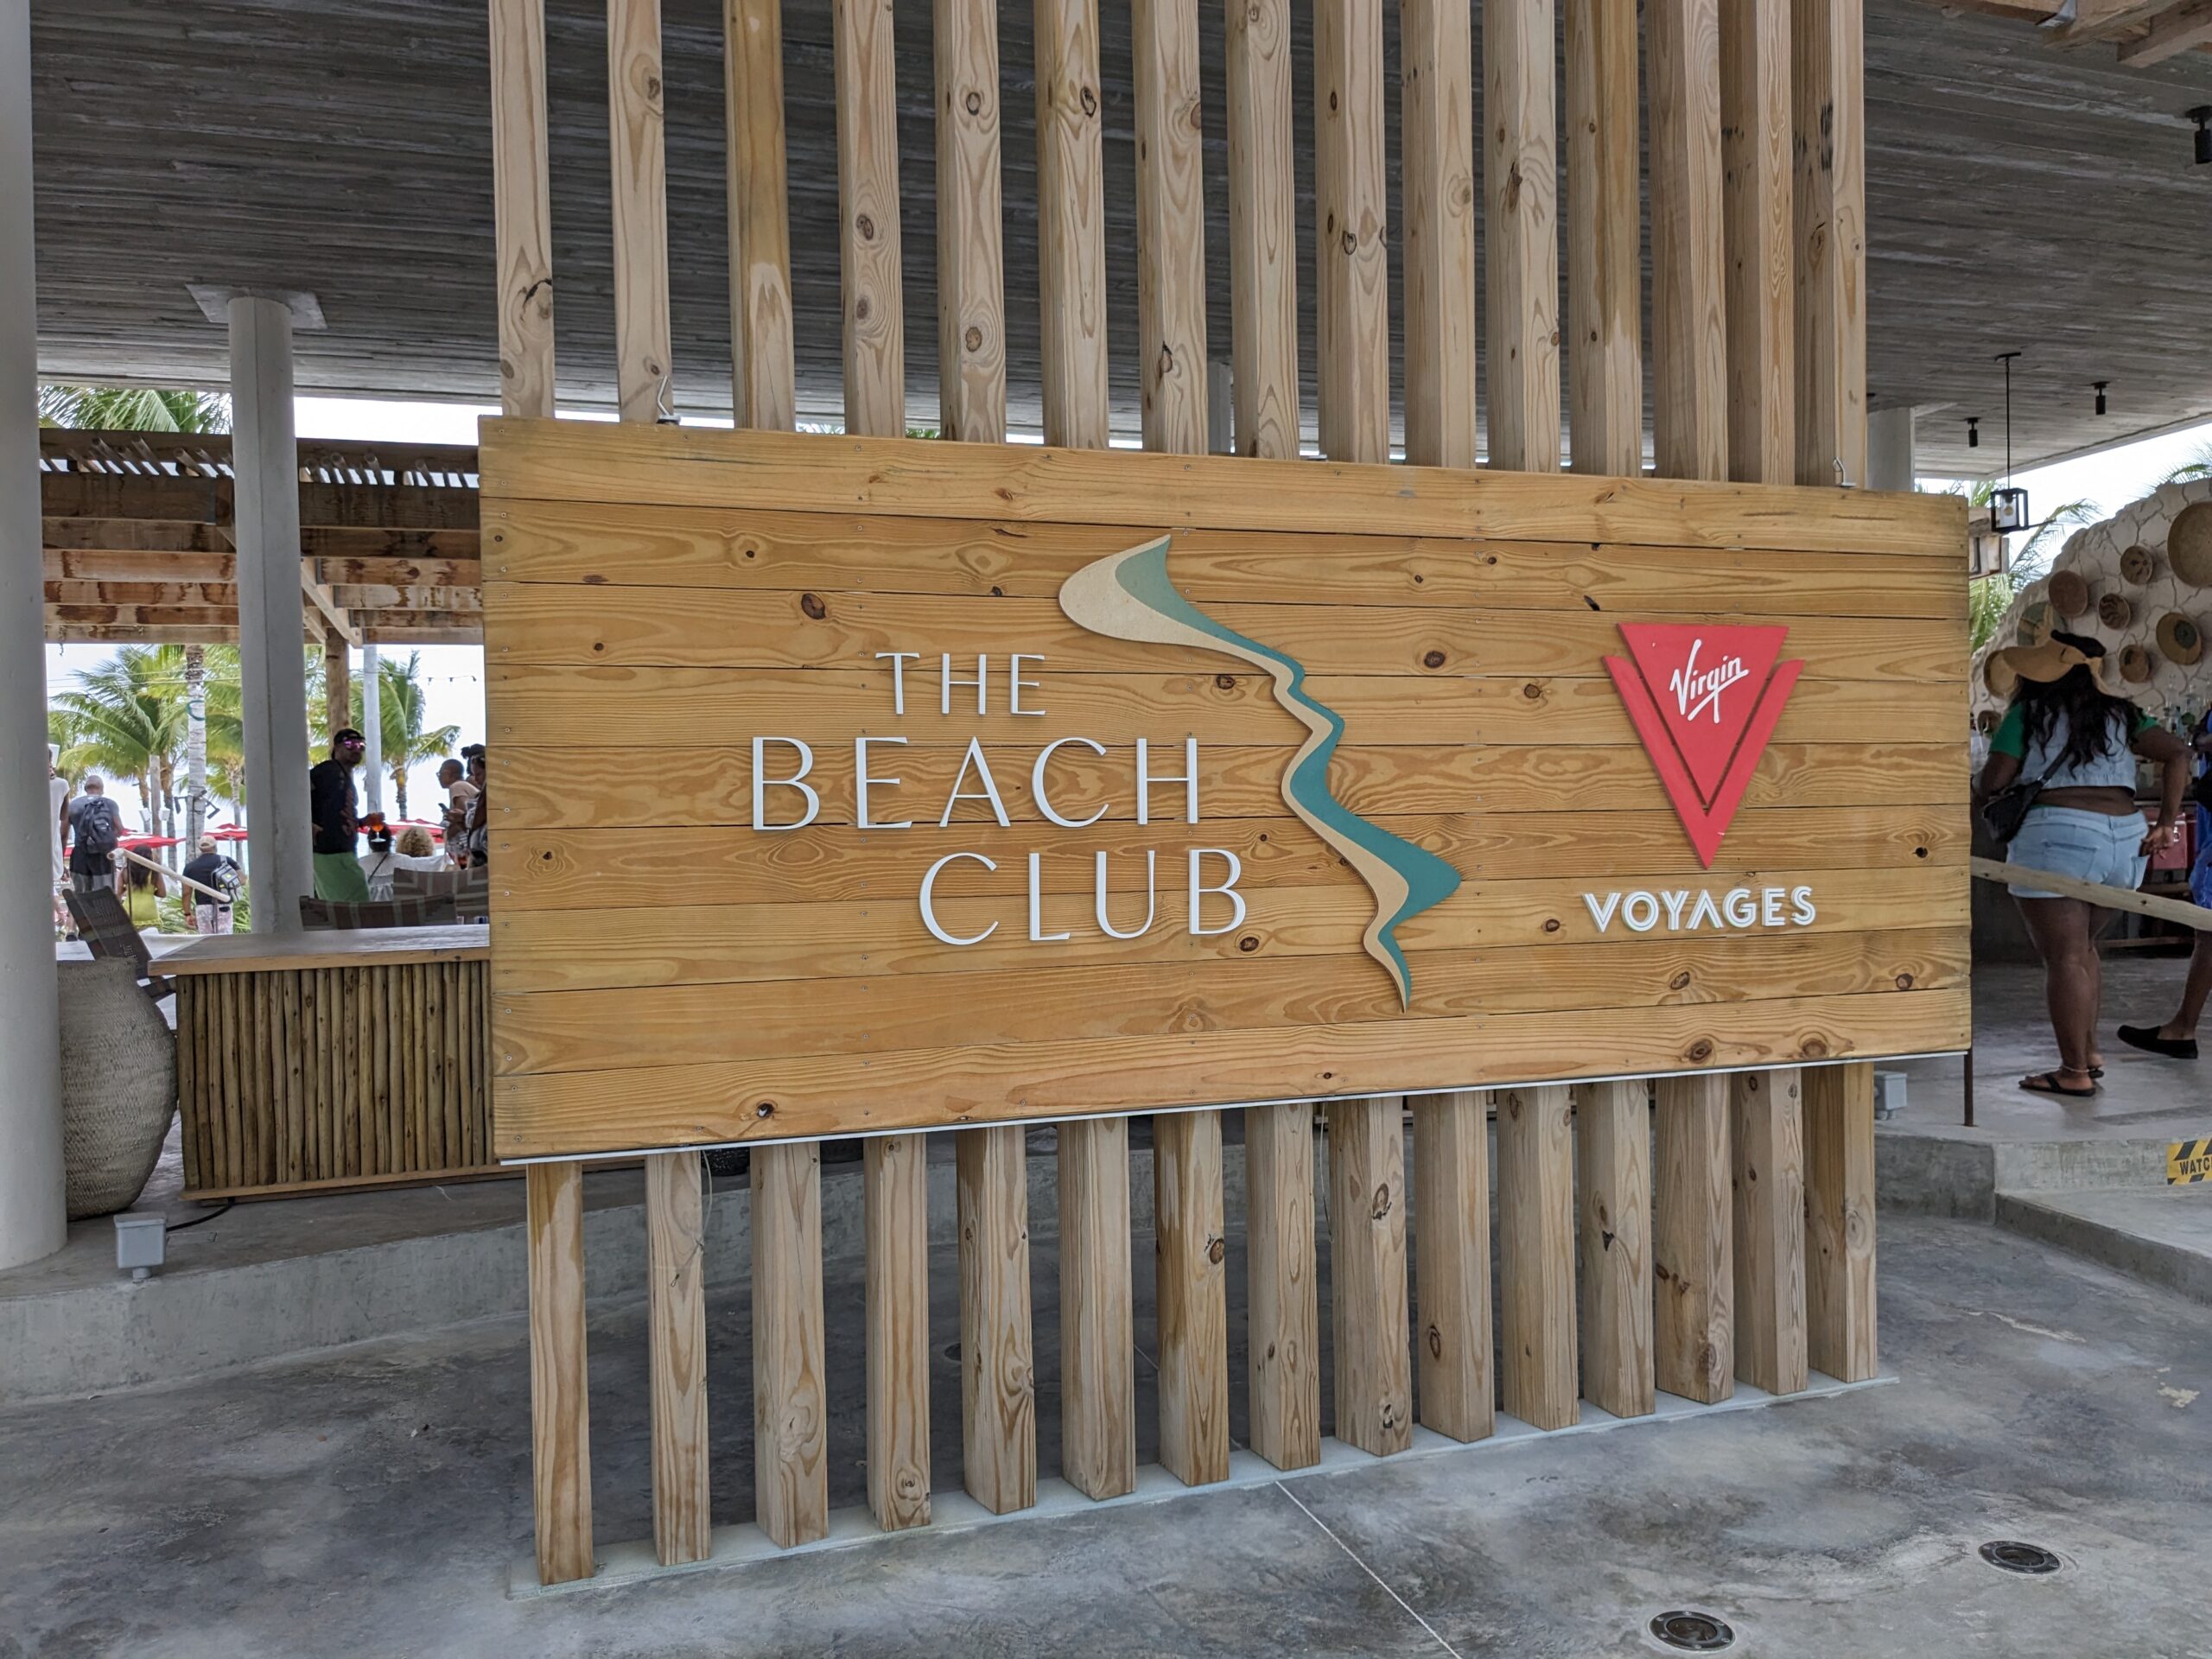 Party at the Beach Club at Bimini During Your Virgin Voyages Adult Cruise - The Beach Club Sign on Bimini